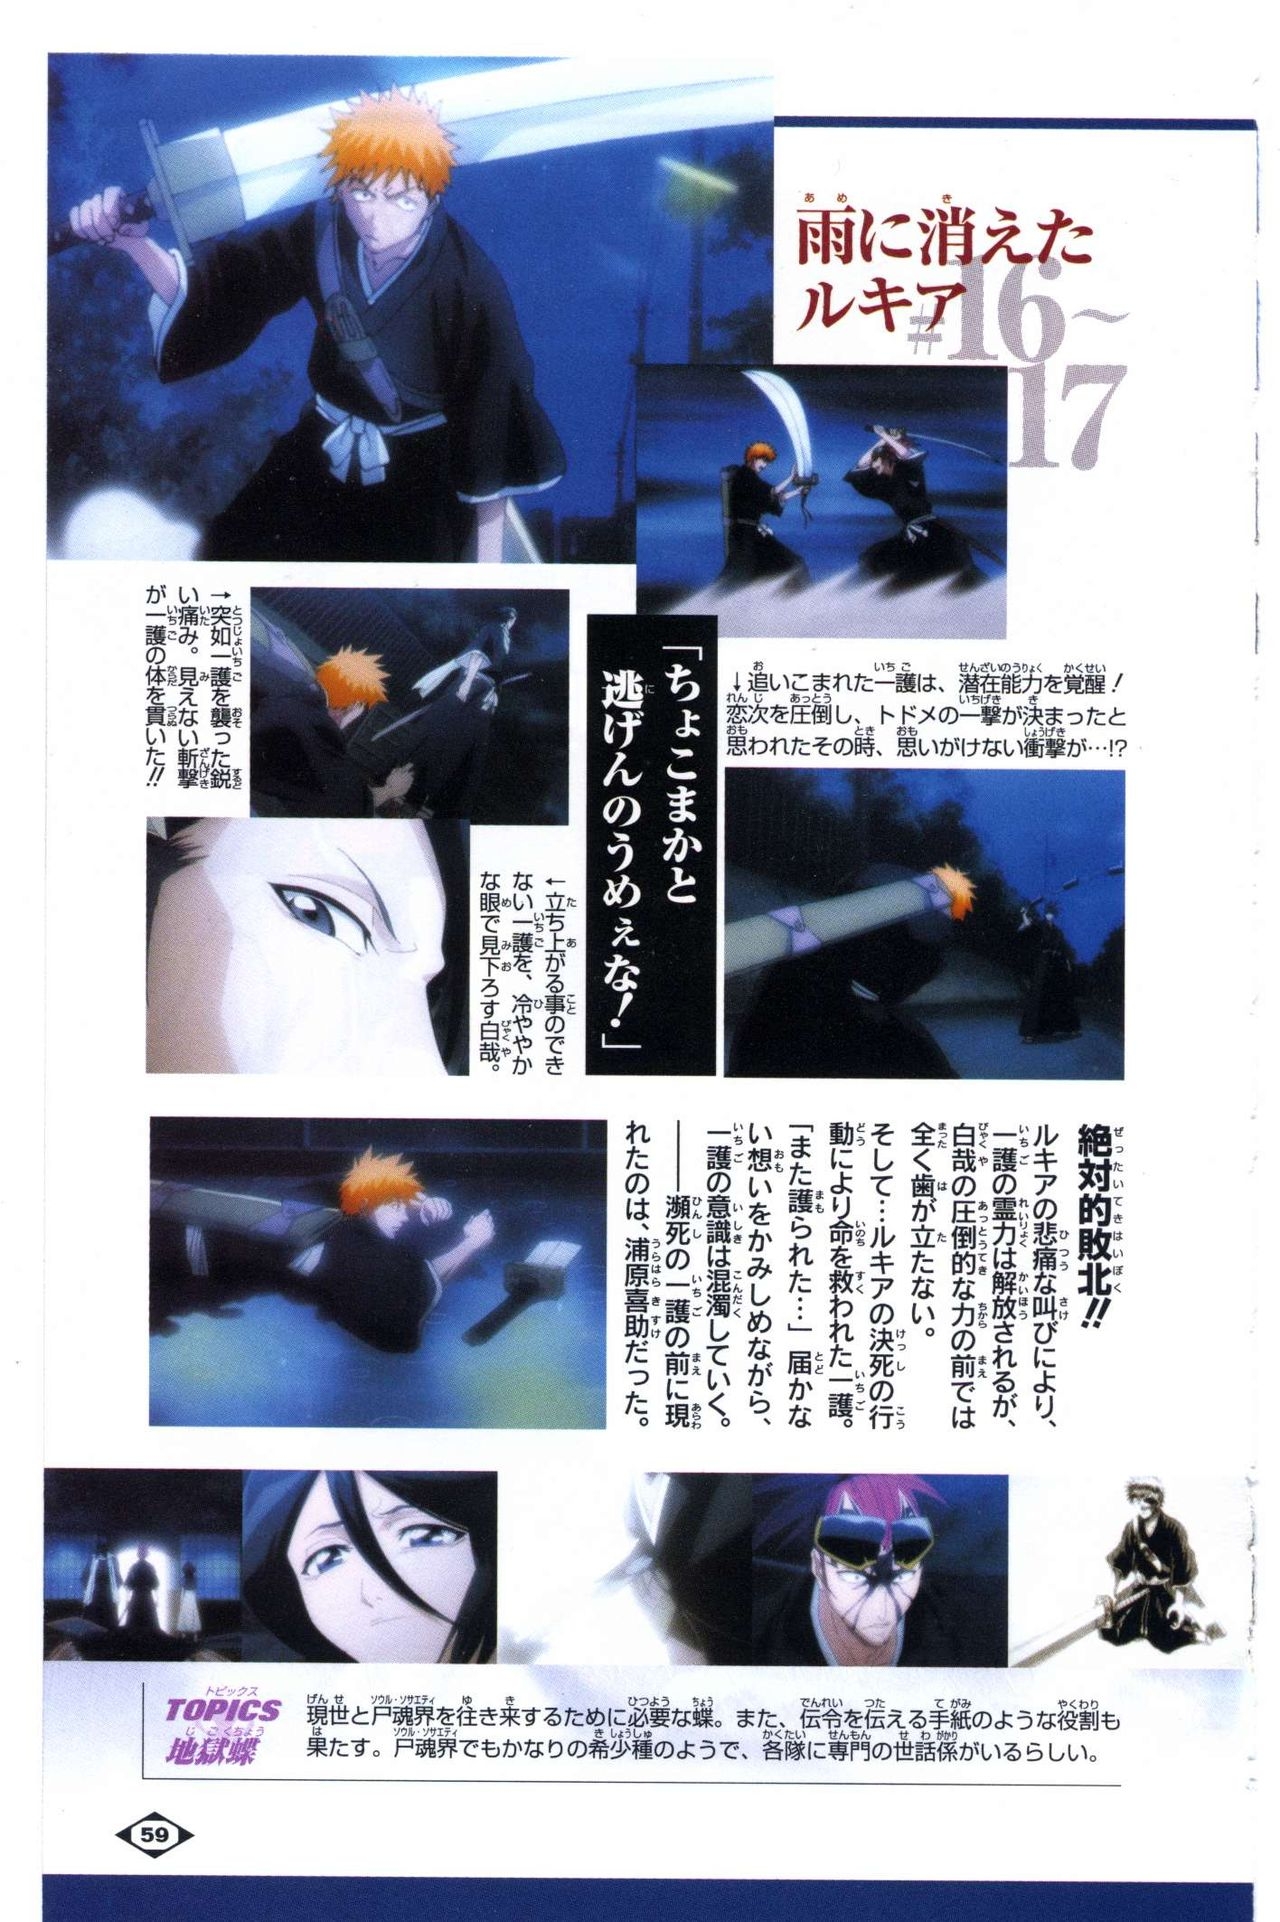 Bleach: Official Animation Book VIBEs 59